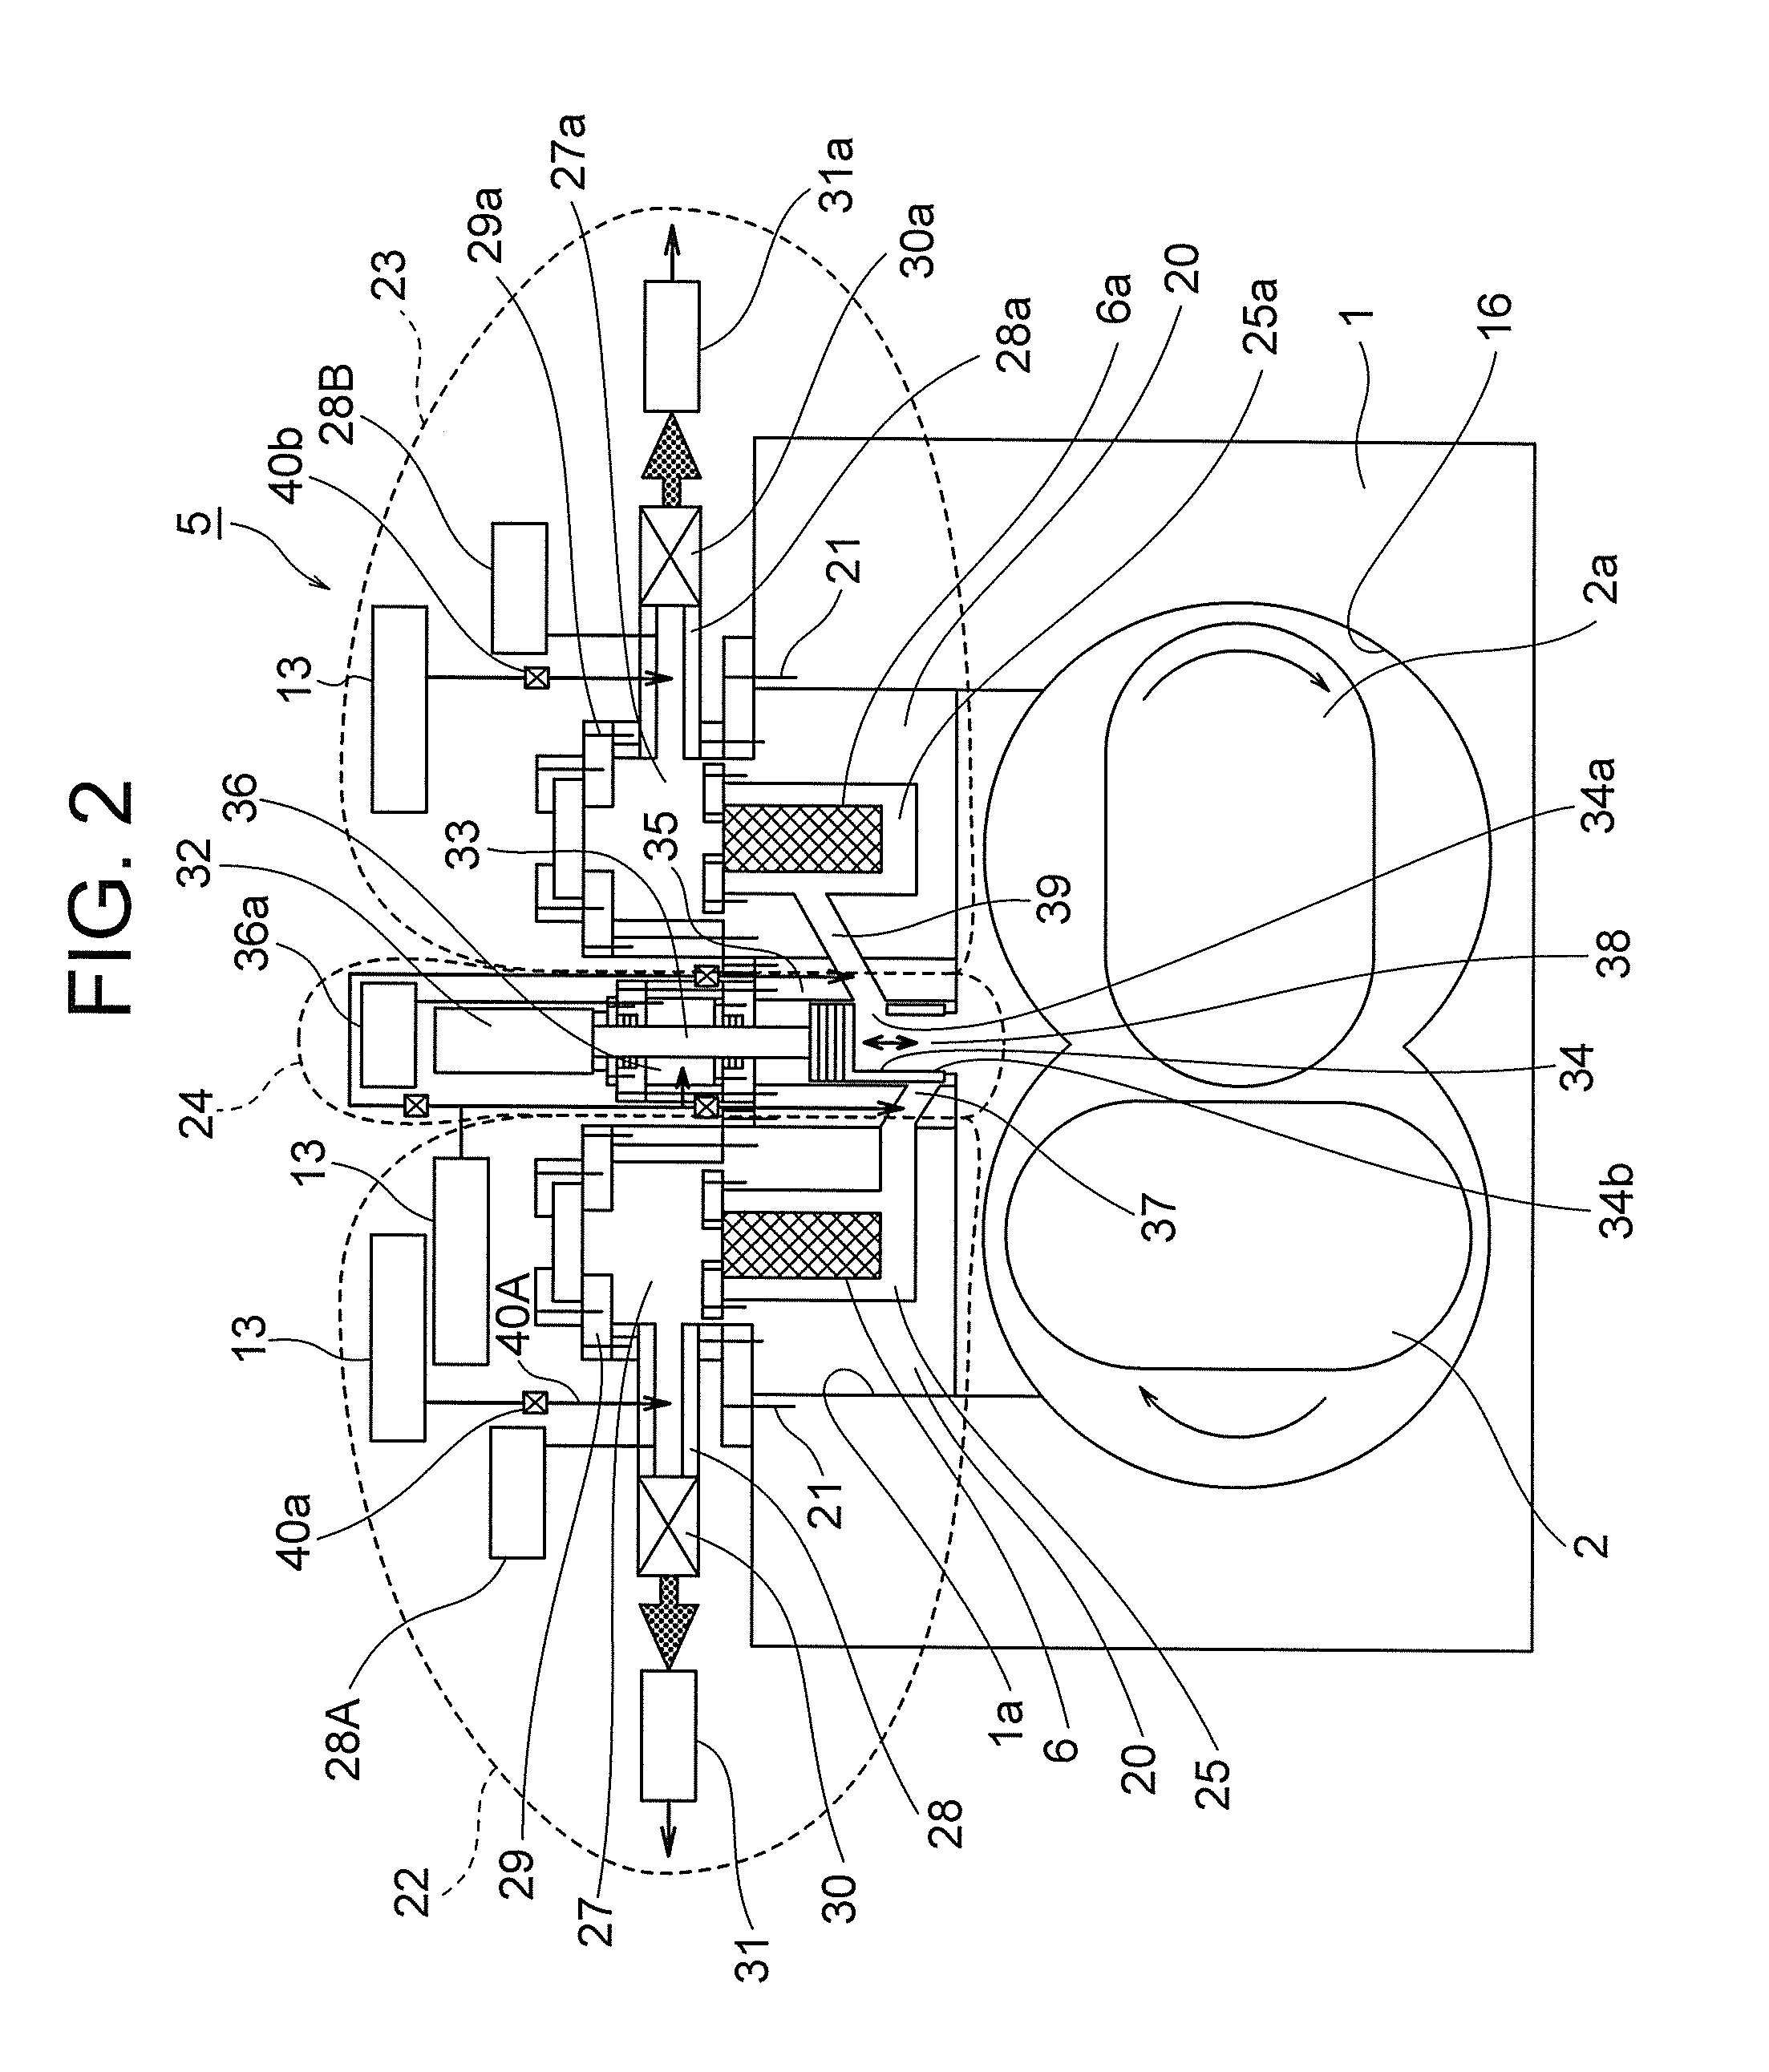 Continuous extrusion device based on twin screw extruder